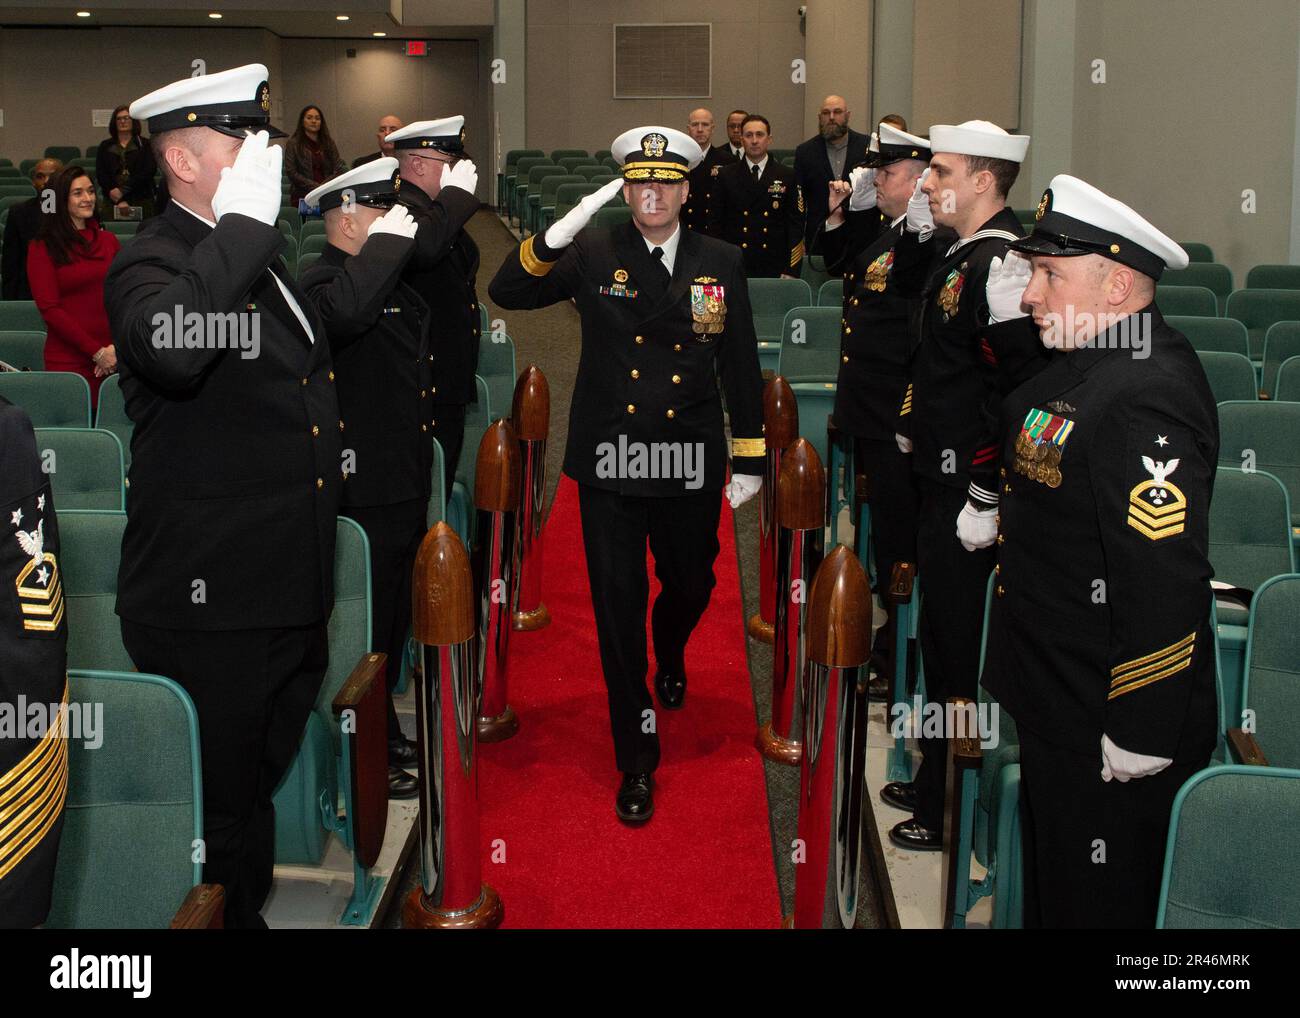 230324 -N-ED185-3065 KEYPORT, Wash. (March 24, 2023) – Rear Adm. Mark Behning, commander, Submarine Group 9, passes through sideboys during a change of command ceremony for Commander, Submarine Squadron 19 (COMSUBRON 19).  Capt. Dale Klein relieved Capt. Sean Huey as commodore of COMSUBRON 19. Stock Photo